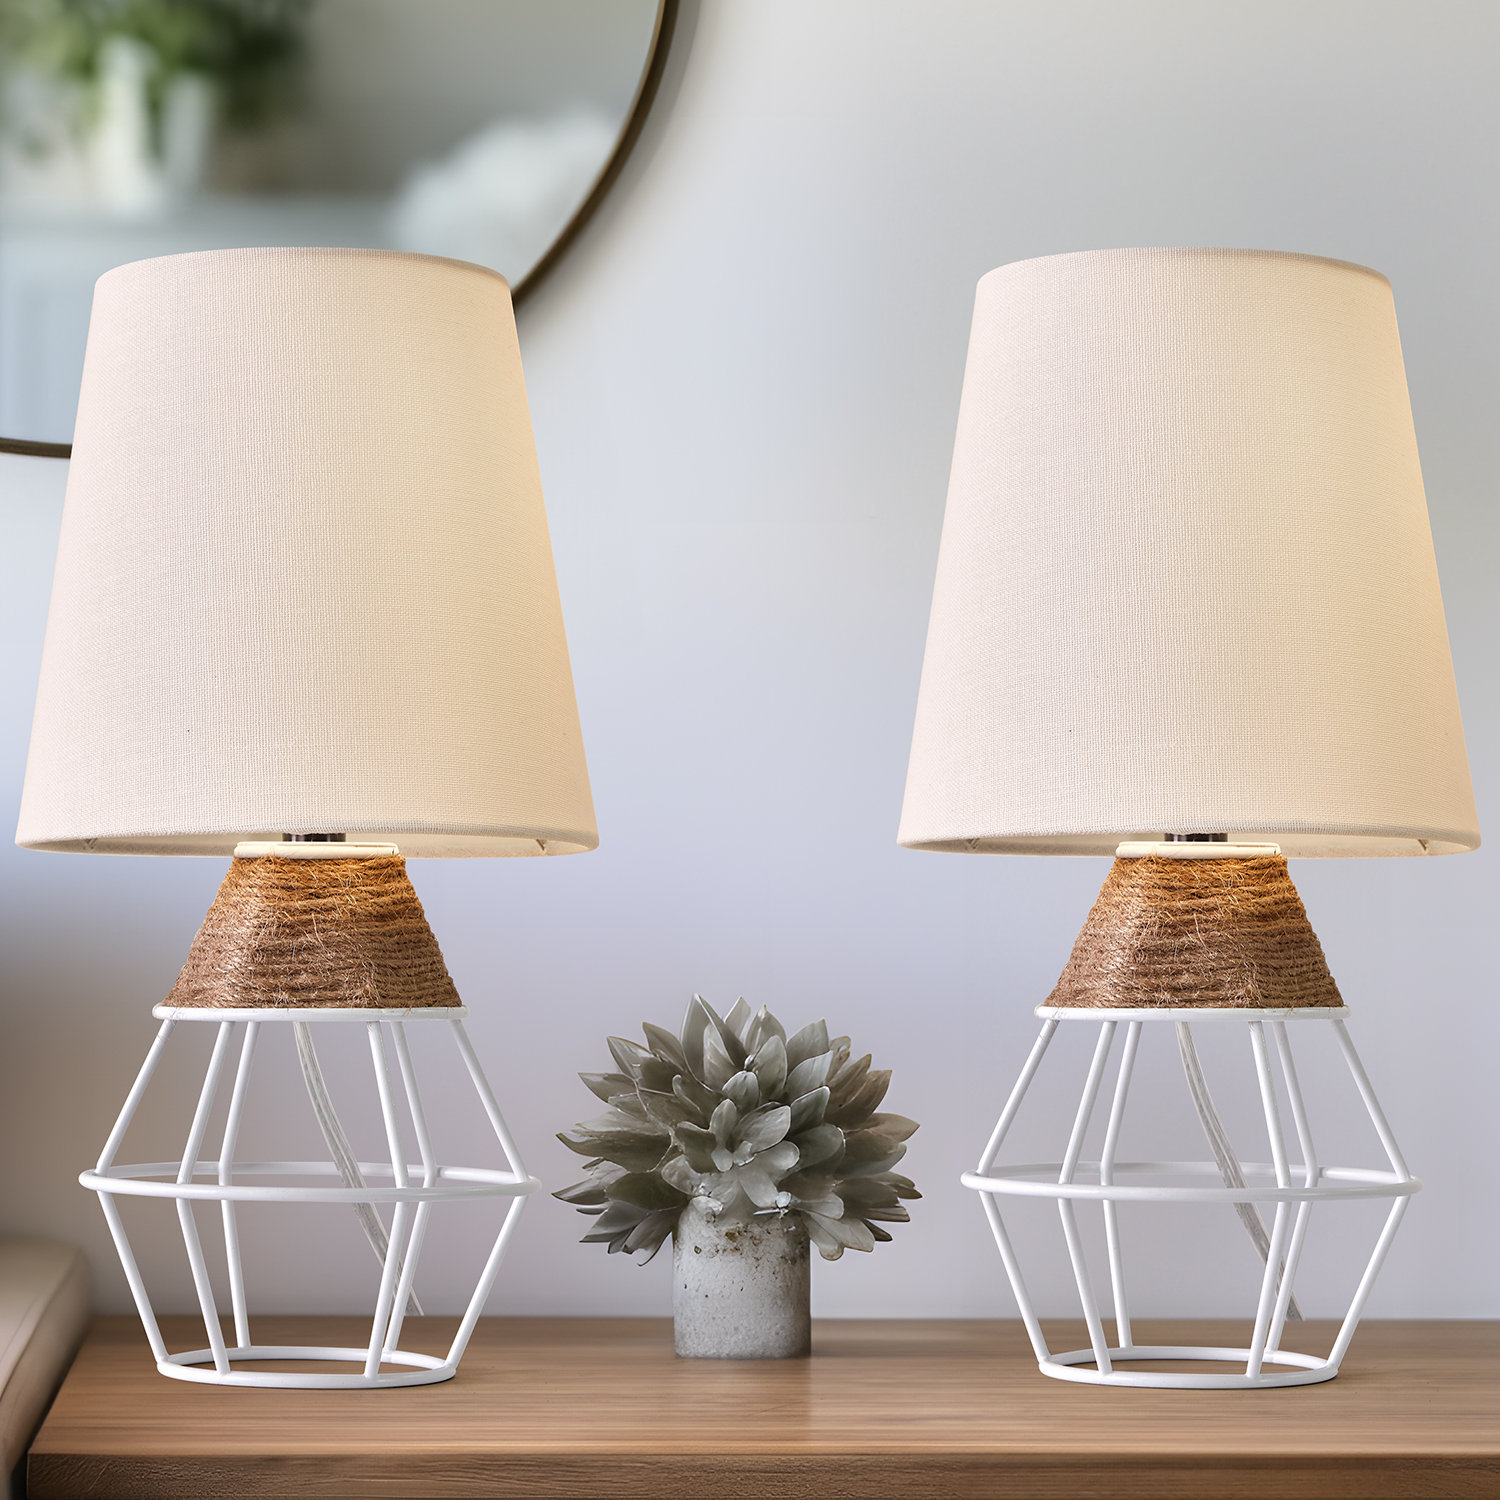 Table lamp combinations